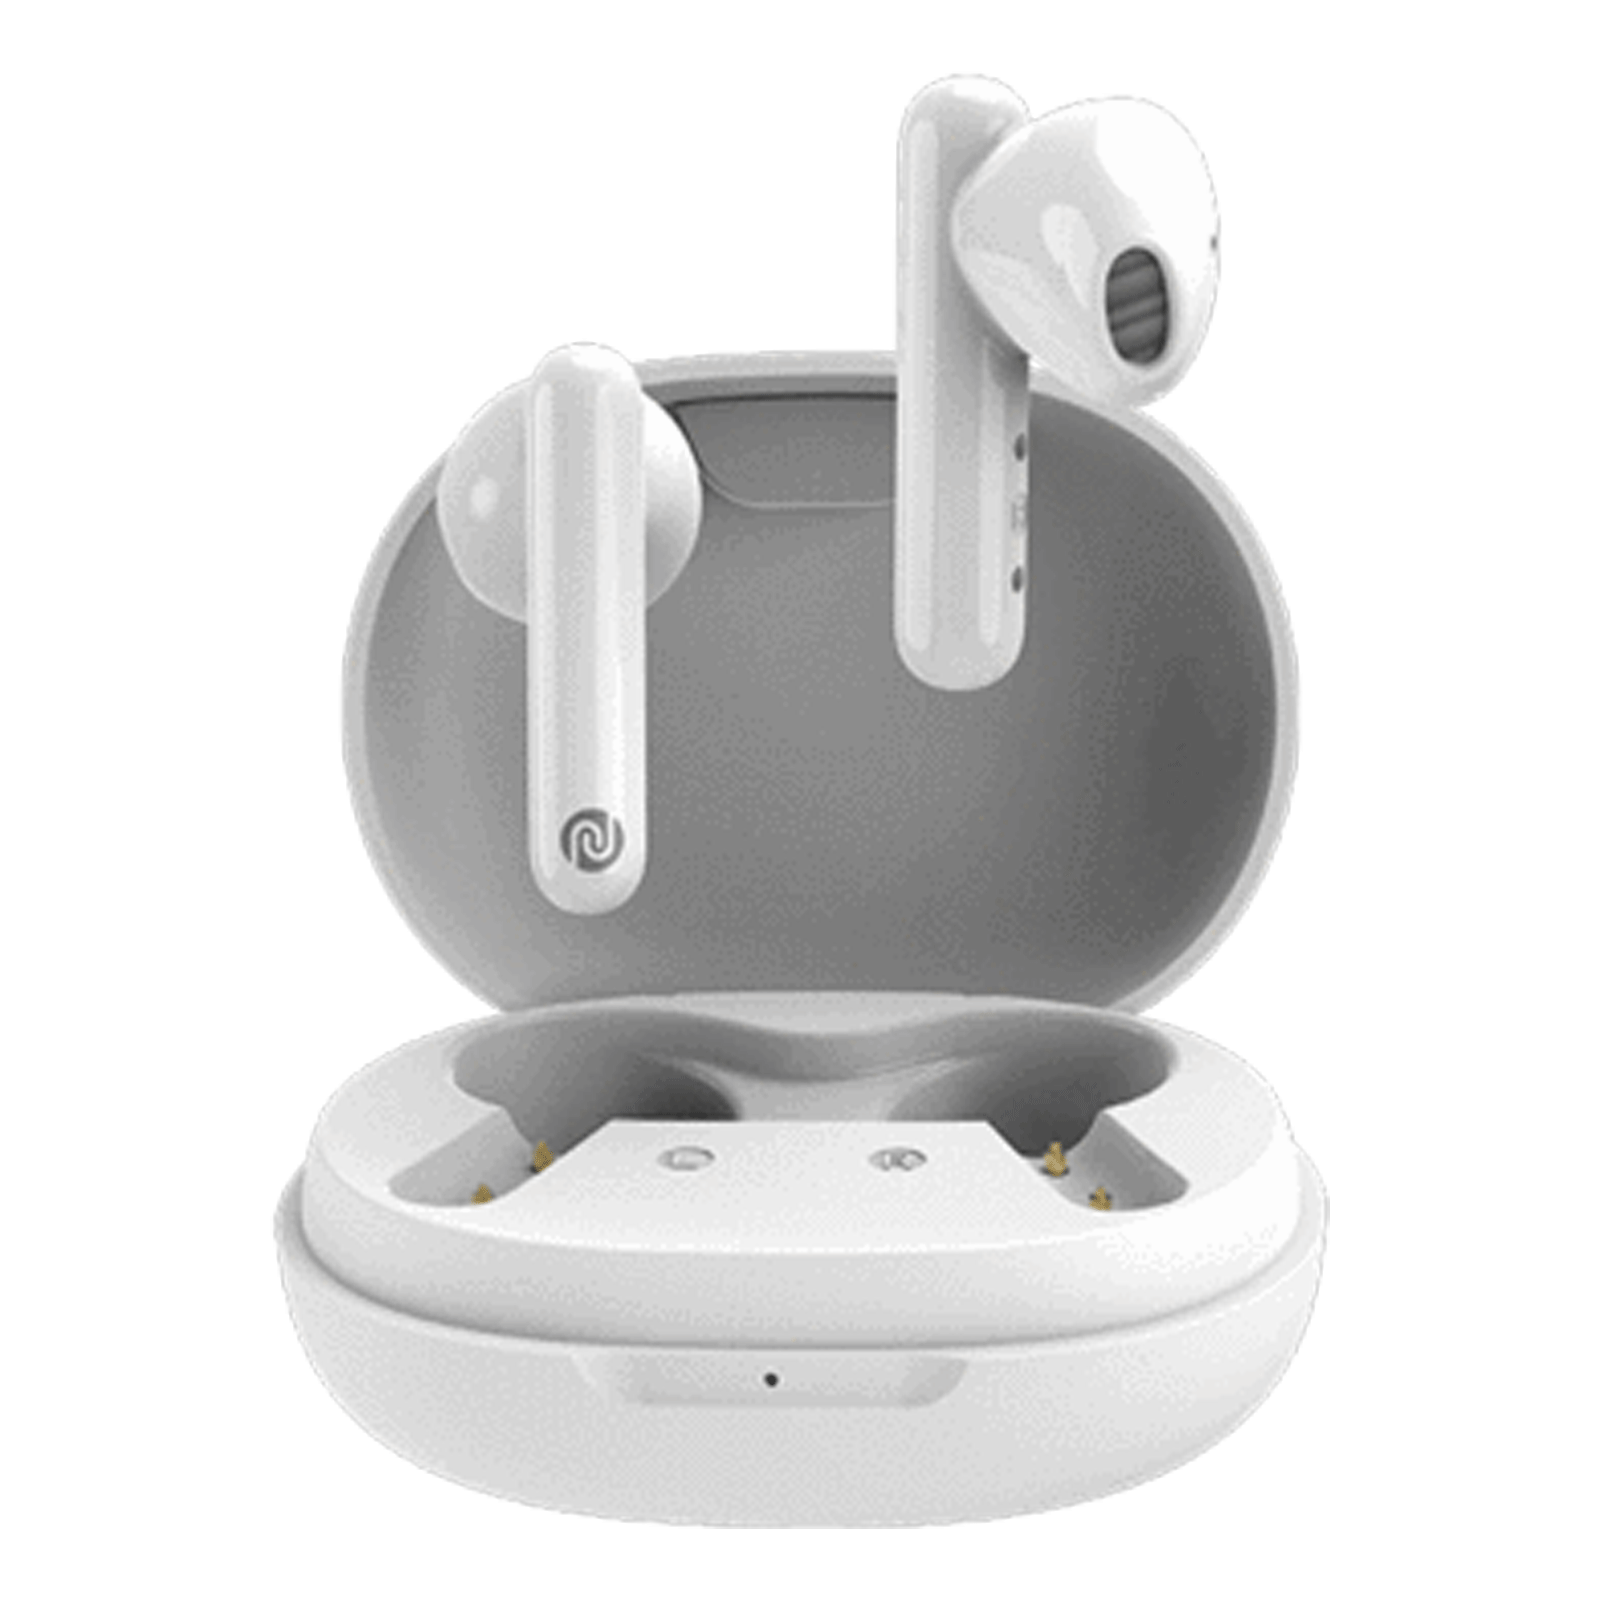 noise - noise Air Buds In-Ear Truly Wireless Earbuds with Mic (Bluetooth 5.0, 20-Hour Playtime, White)